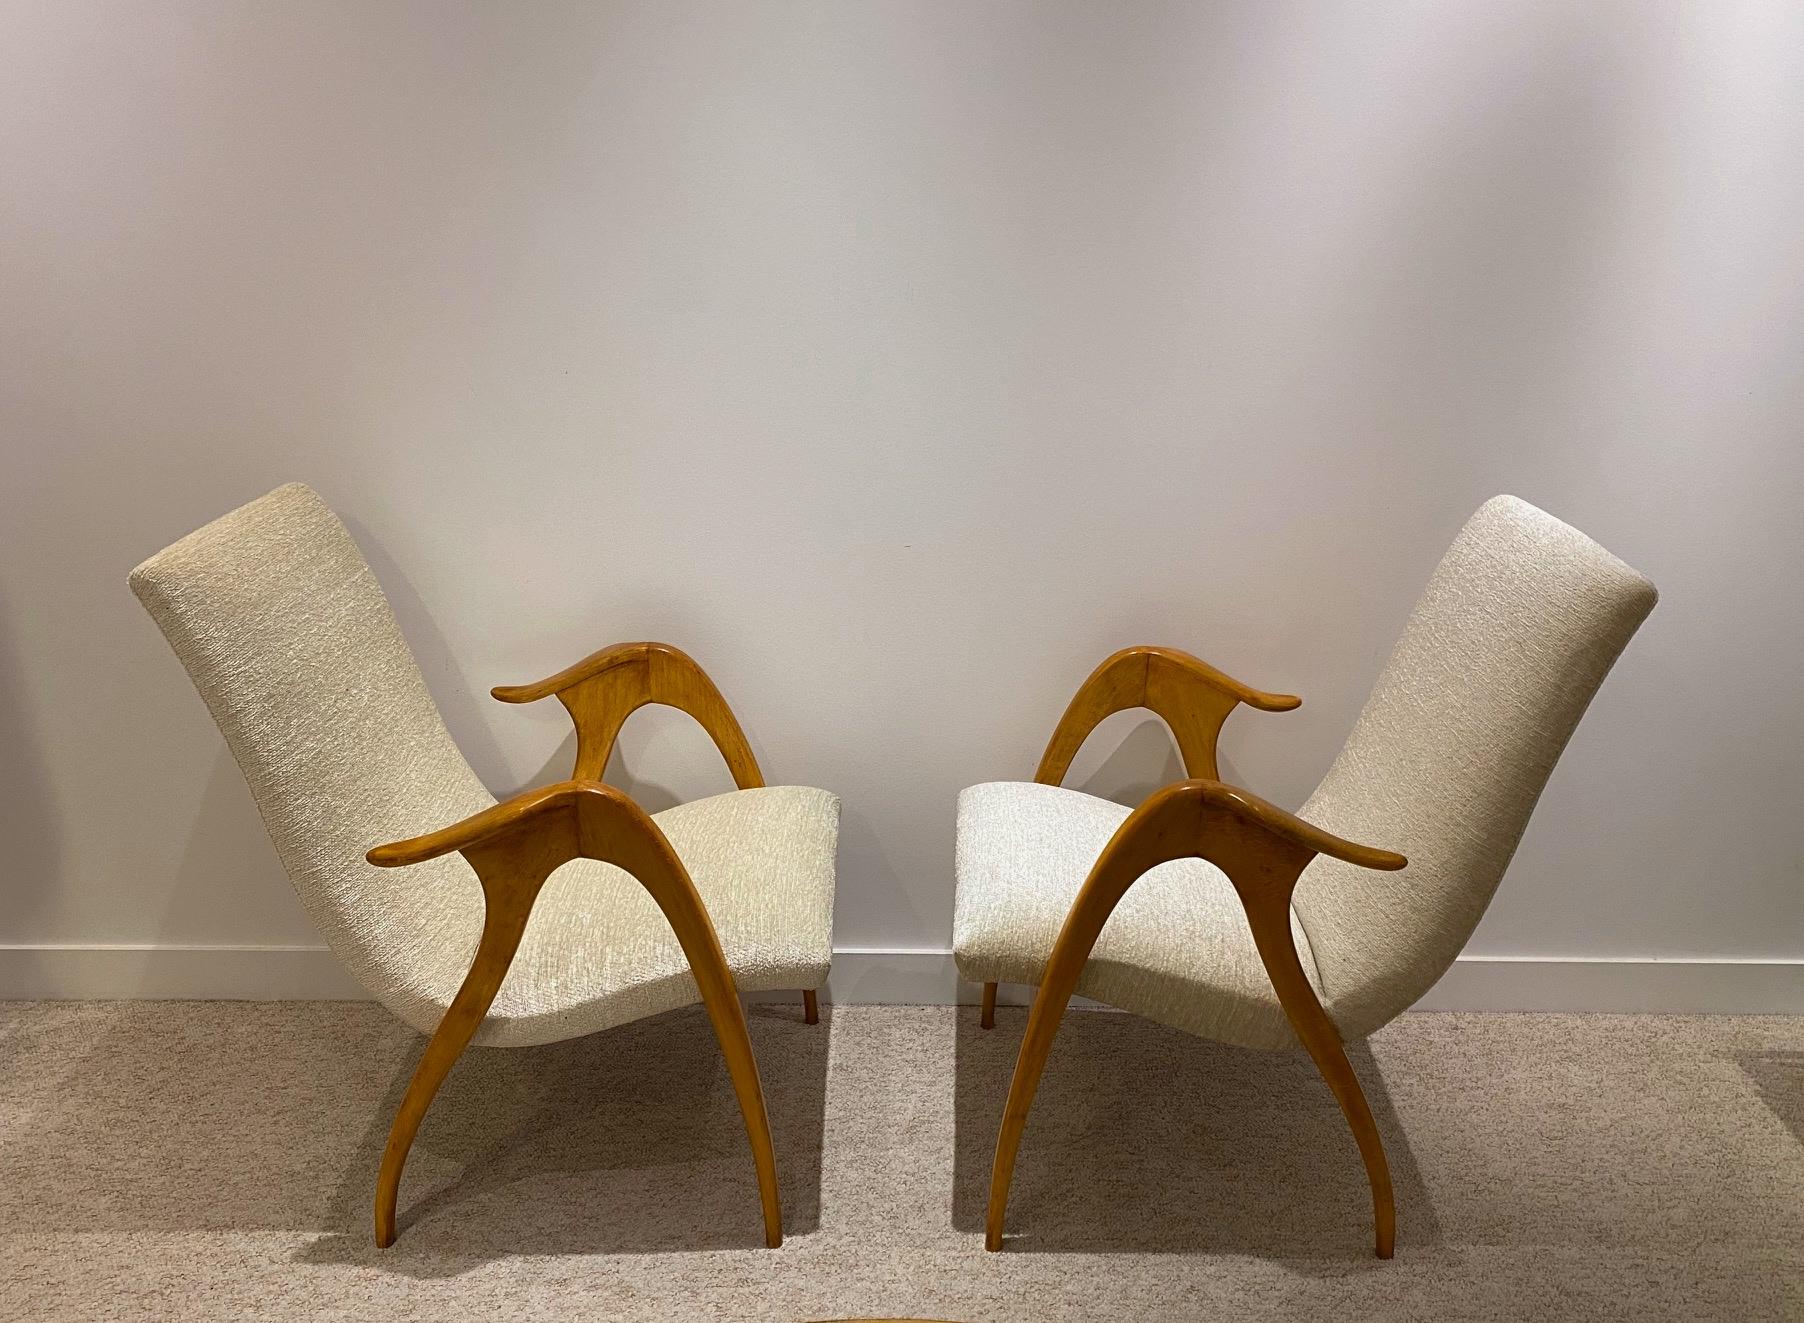 Sculptural pair of armchairs by Malatesta & Masson, Italy, circa 1950.
Maple wood and golden ivory upholstery (Pierre Frey).
  